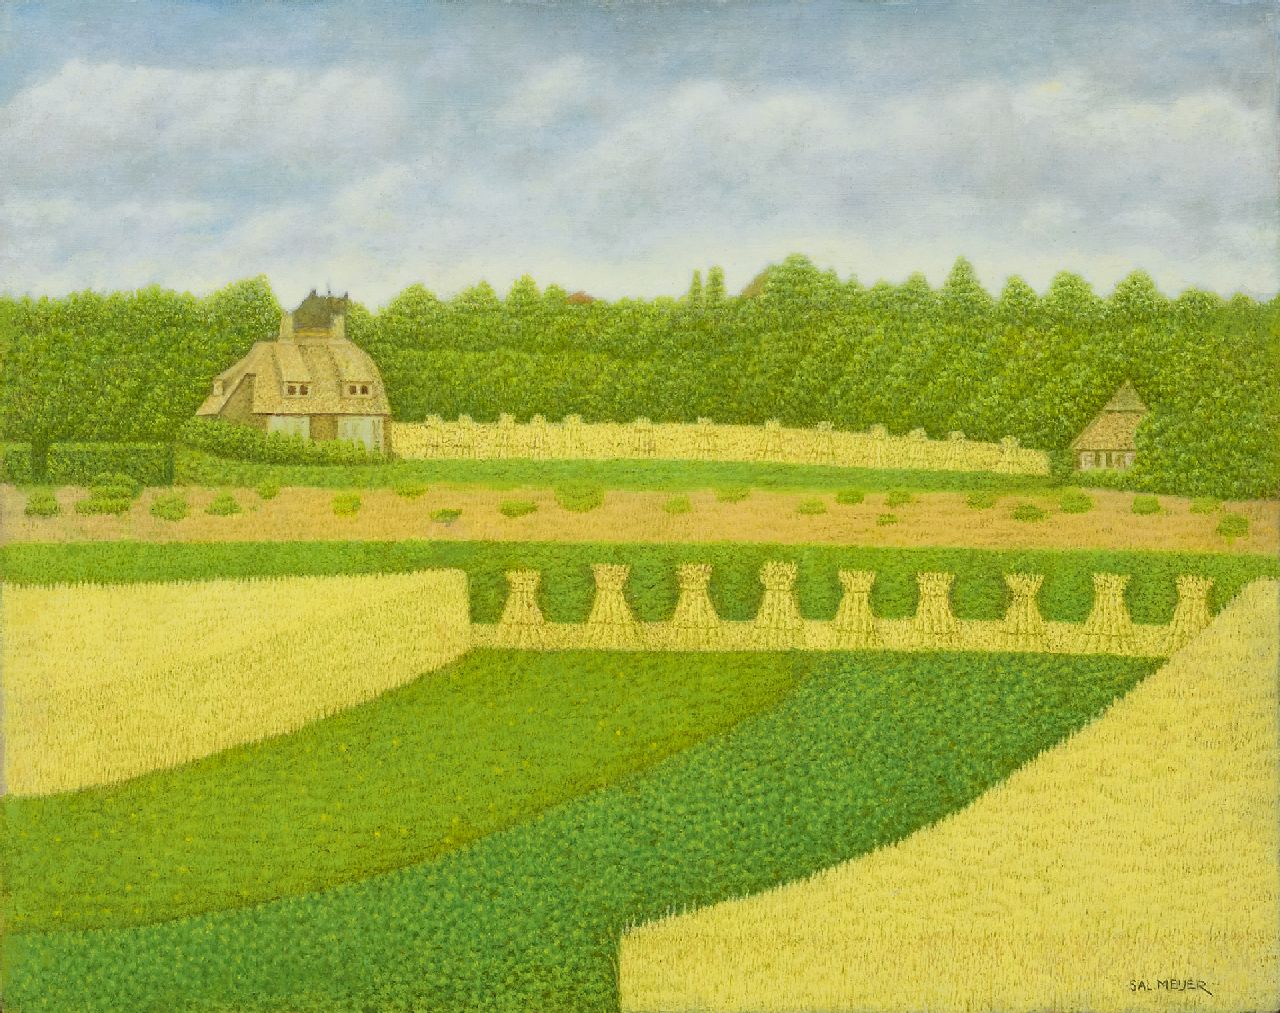 Meijer S.  | Salomon 'Sal' Meijer | Paintings offered for sale | Country house near Blaricum, oil on panel 40.0 x 49.9 cm, signed l.r.